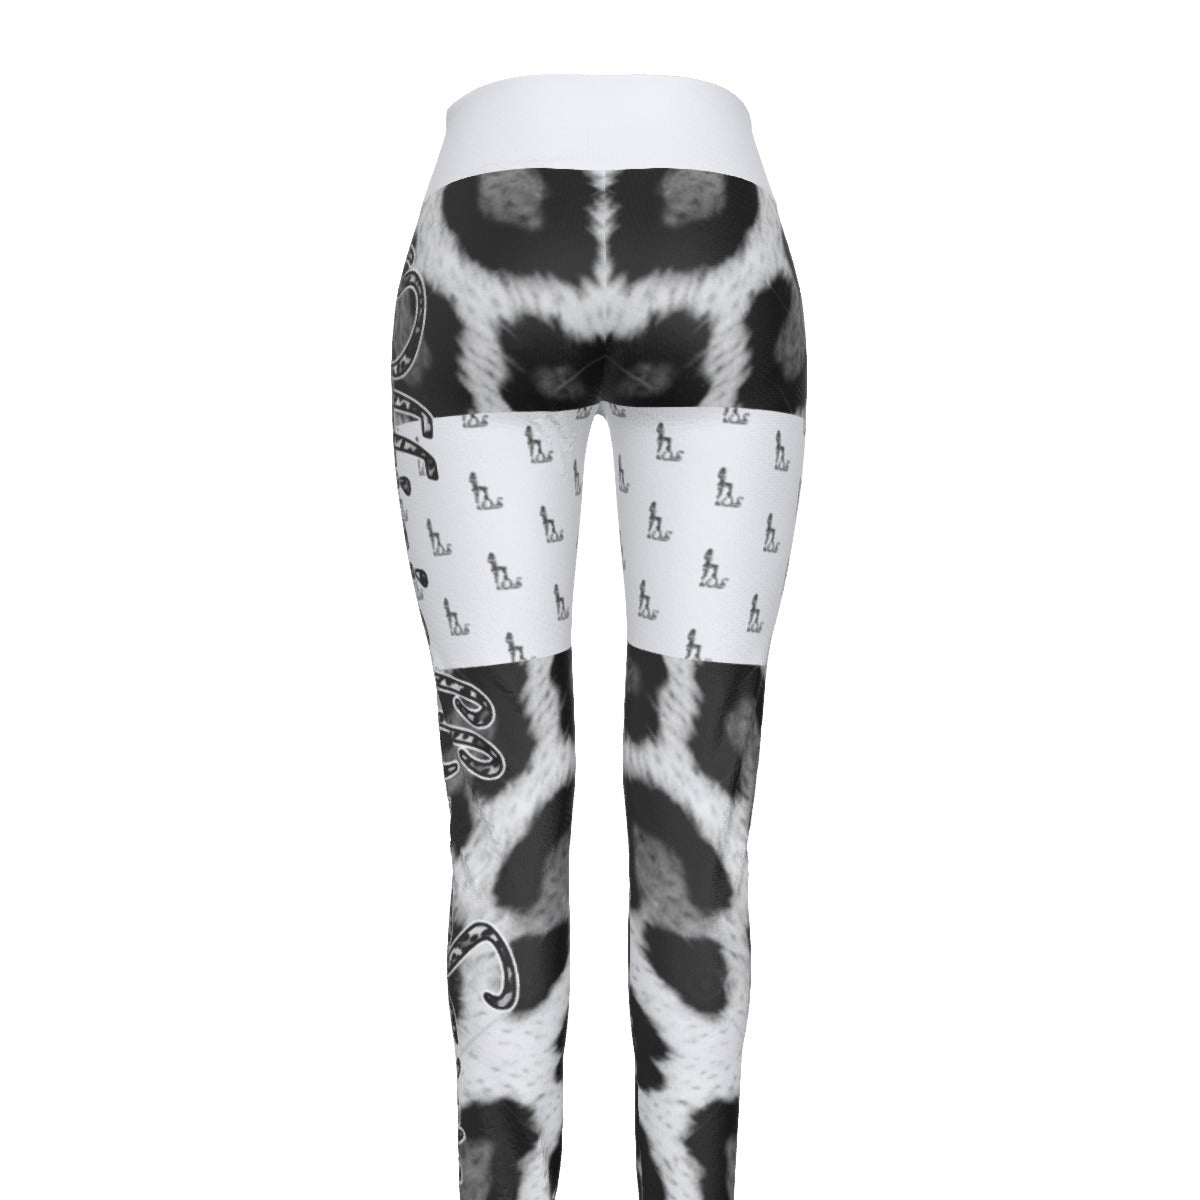 Officially Sexy Snow Leopard Print Collection Women's White High Waist Thigh High Booty Popper Leggings #2 (English) 3